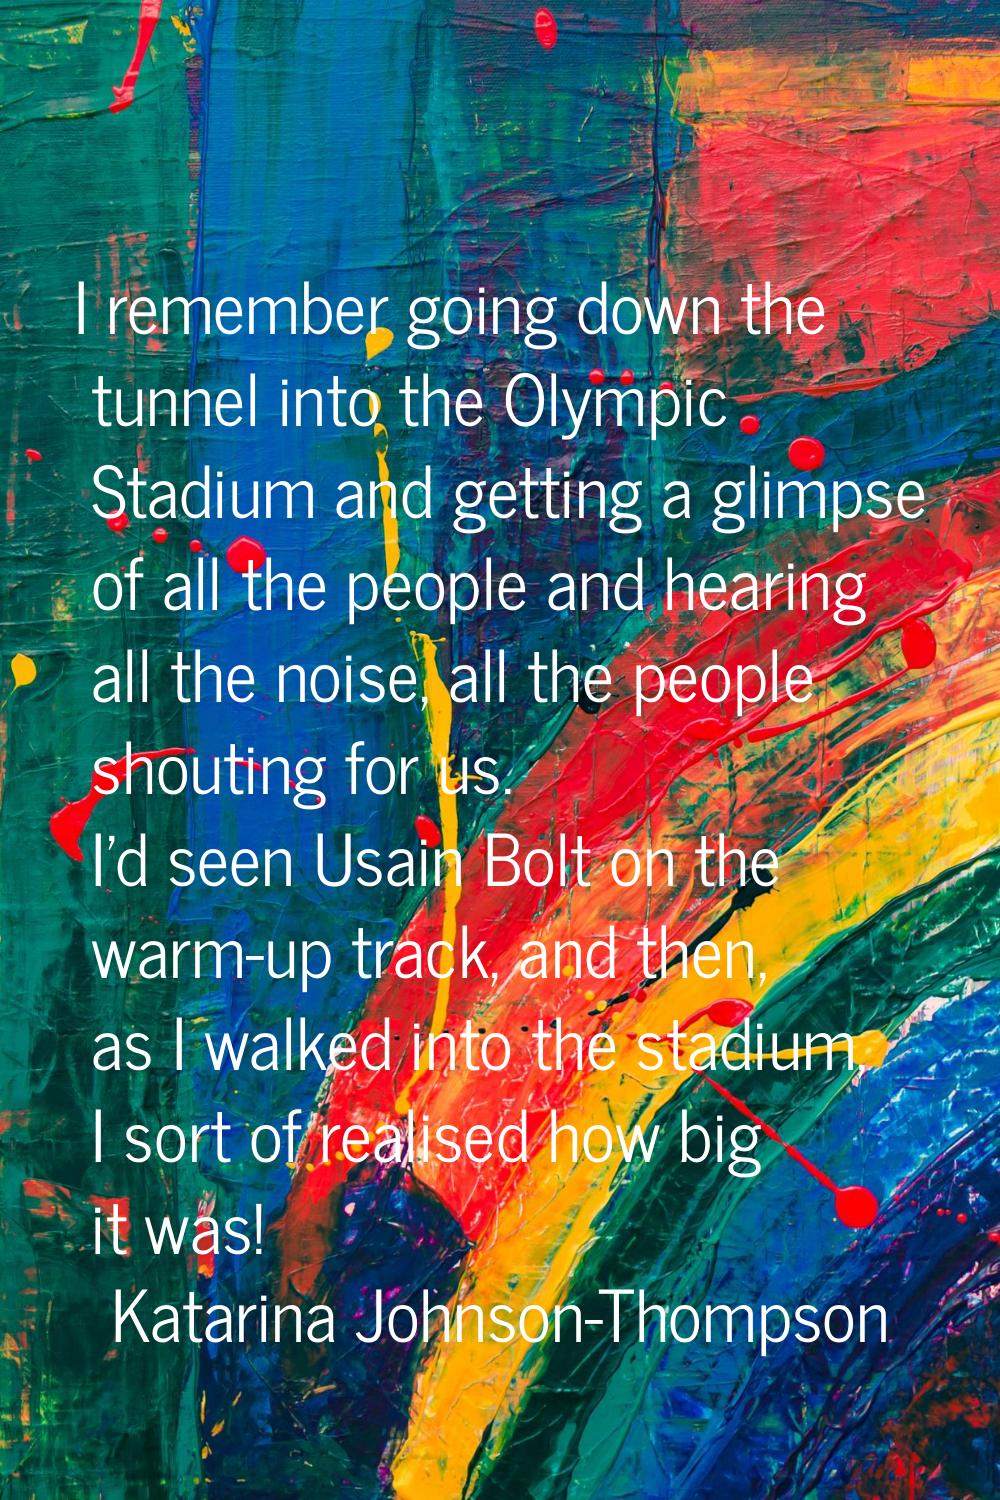 I remember going down the tunnel into the Olympic Stadium and getting a glimpse of all the people a